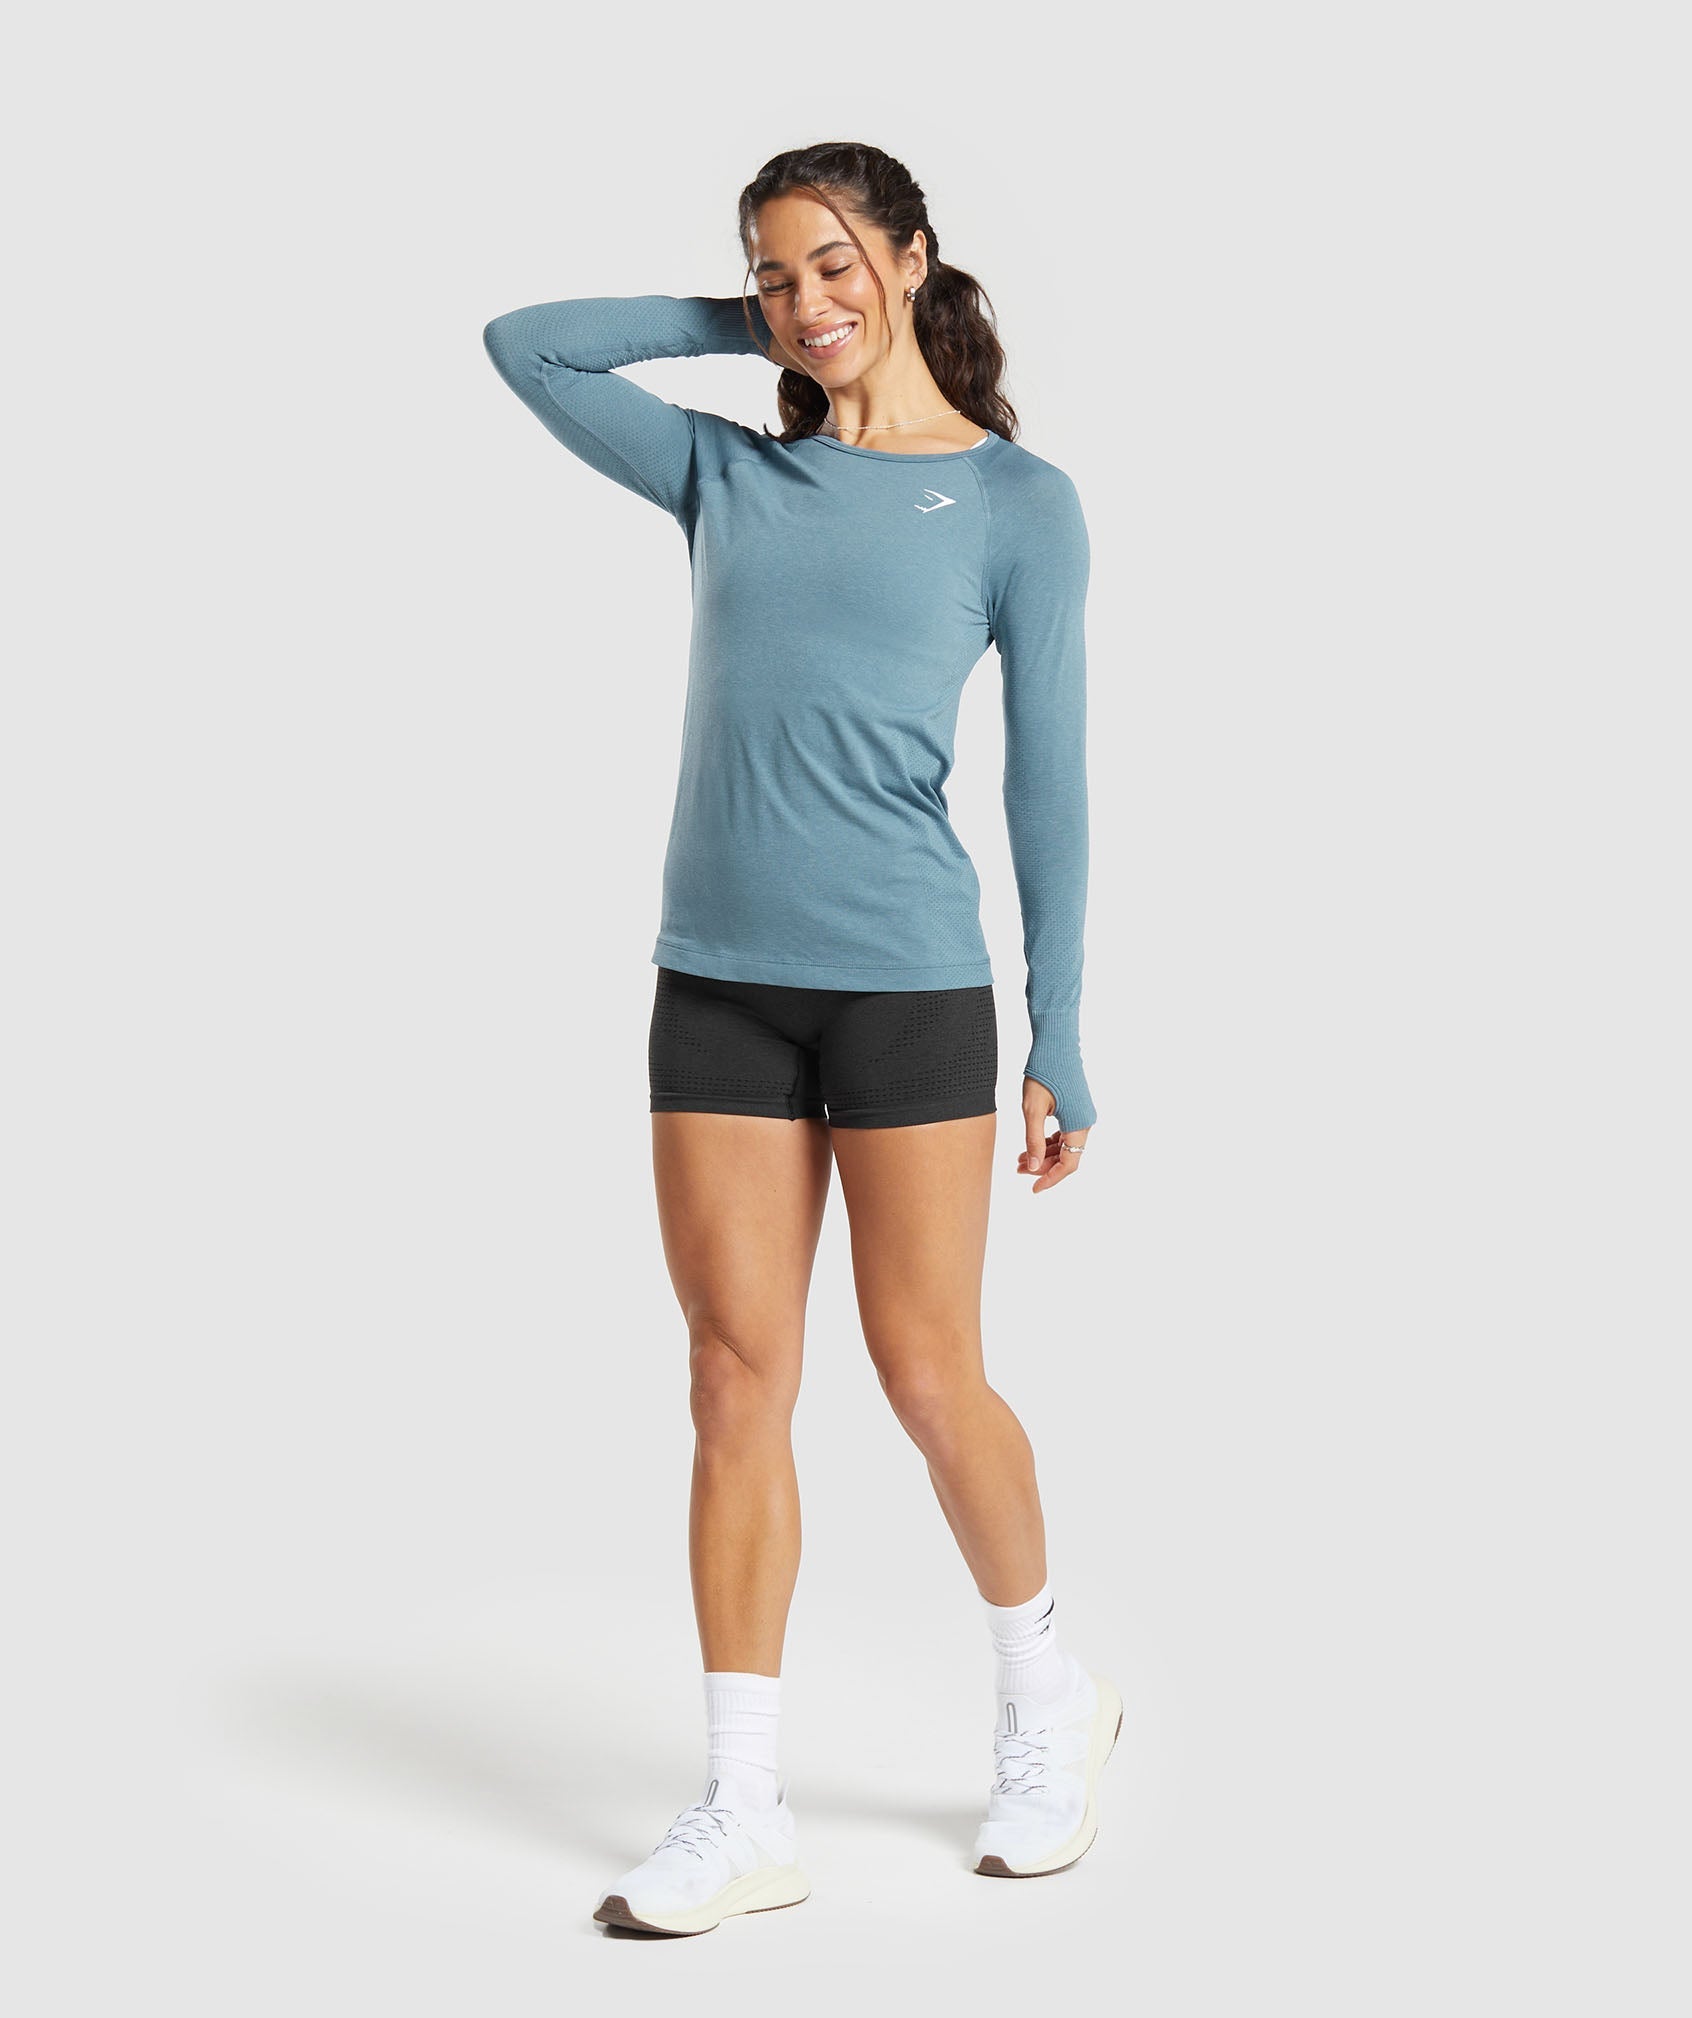 Vital Seamless 2.0 Light Long Sleeve Top in Faded Blue Marl - view 4